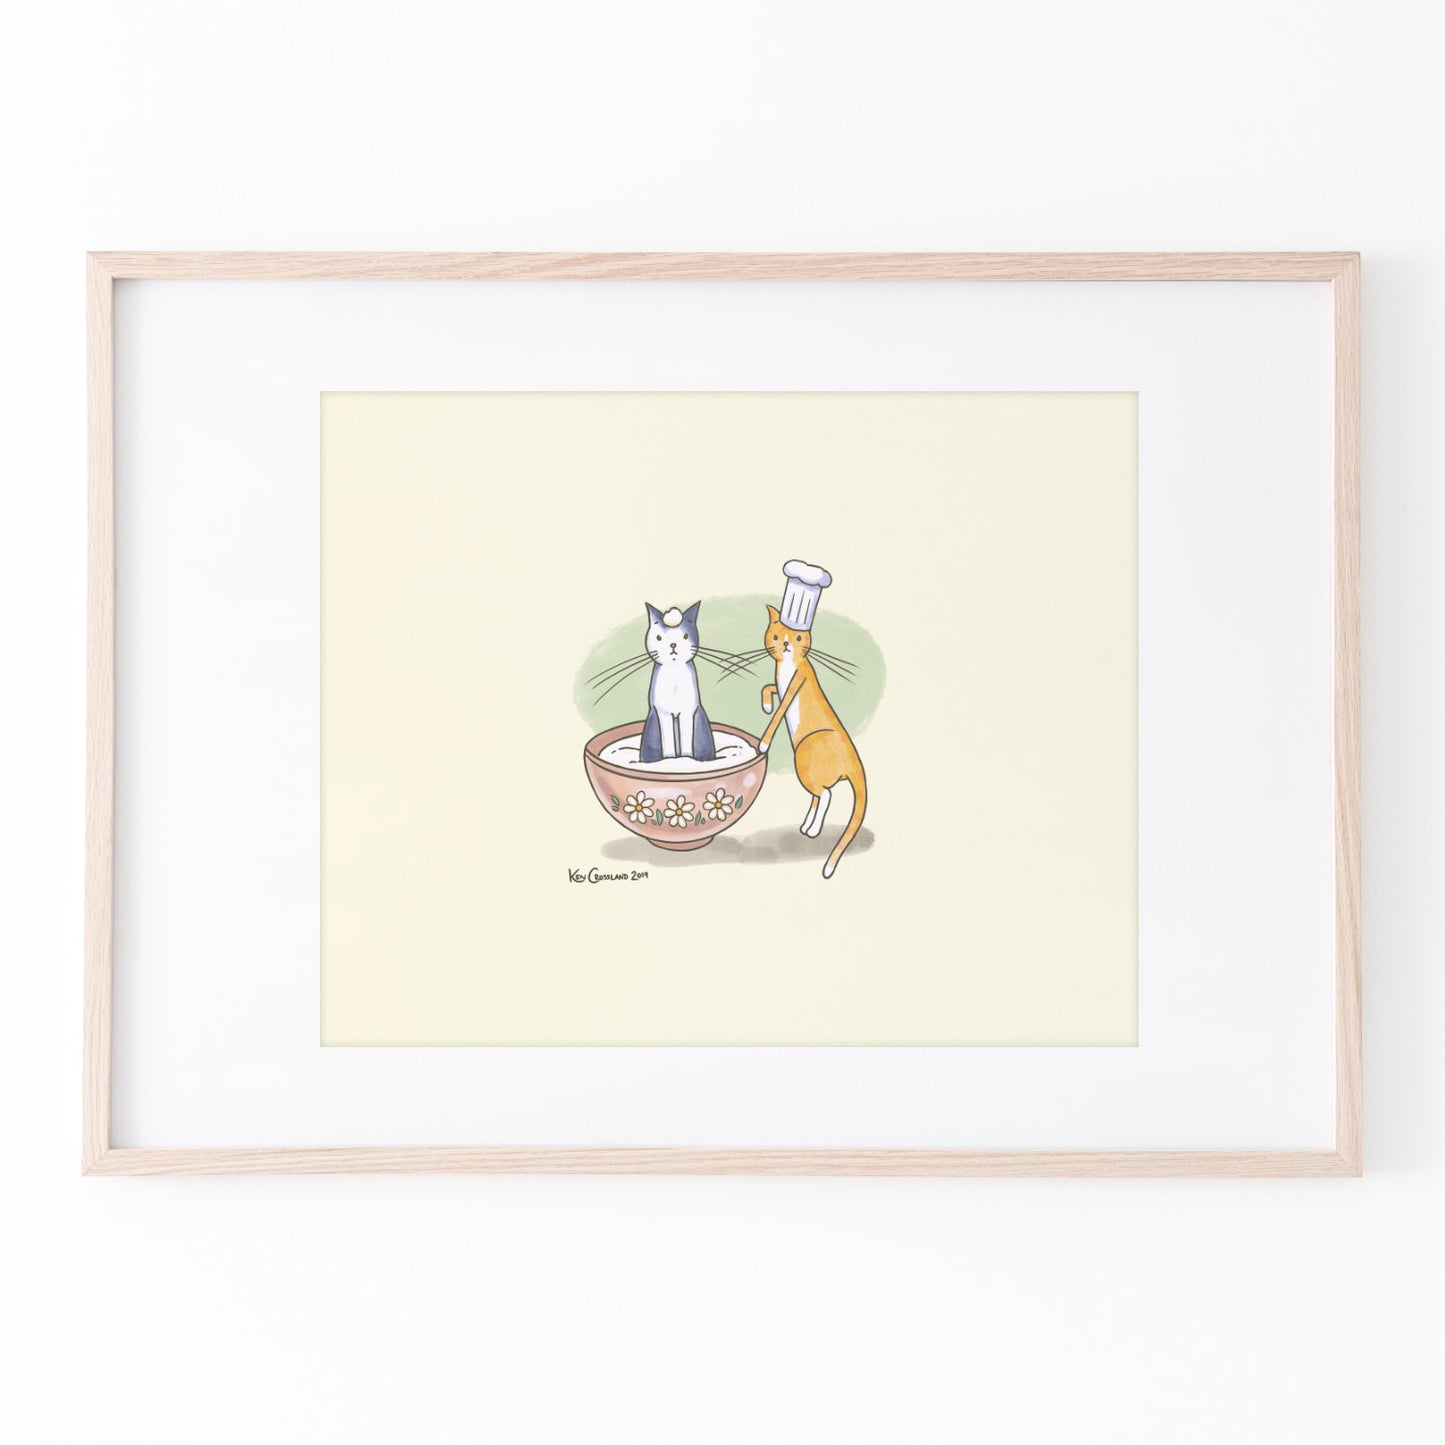 Fred + Nym + Cooking — Art Print